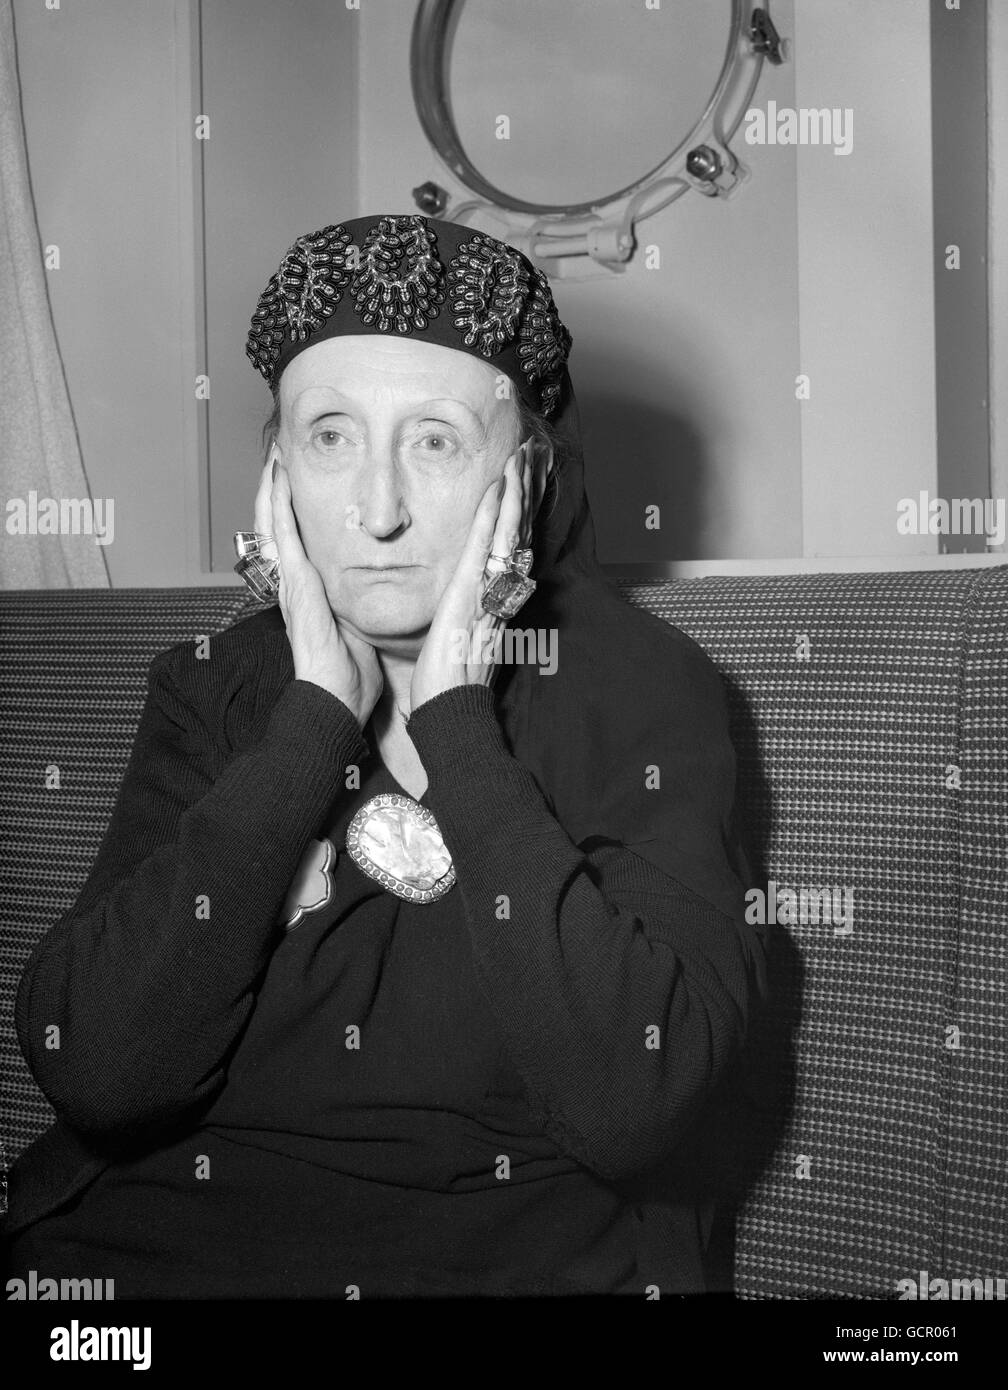 Dame Edith Sitwell - a poet, critic, lecturer and wit - cradles her face in fantastically-ringed hands as she arrives at Southampton aboard the liner United States from America, where she has been giving readings of her poetry. On a visit to Hollywood, Dame Edith met Marilyn Monroe, which brought from the film star the comment: 'I think she is one of the most wonderful women I've ever met.'. Stock Photo